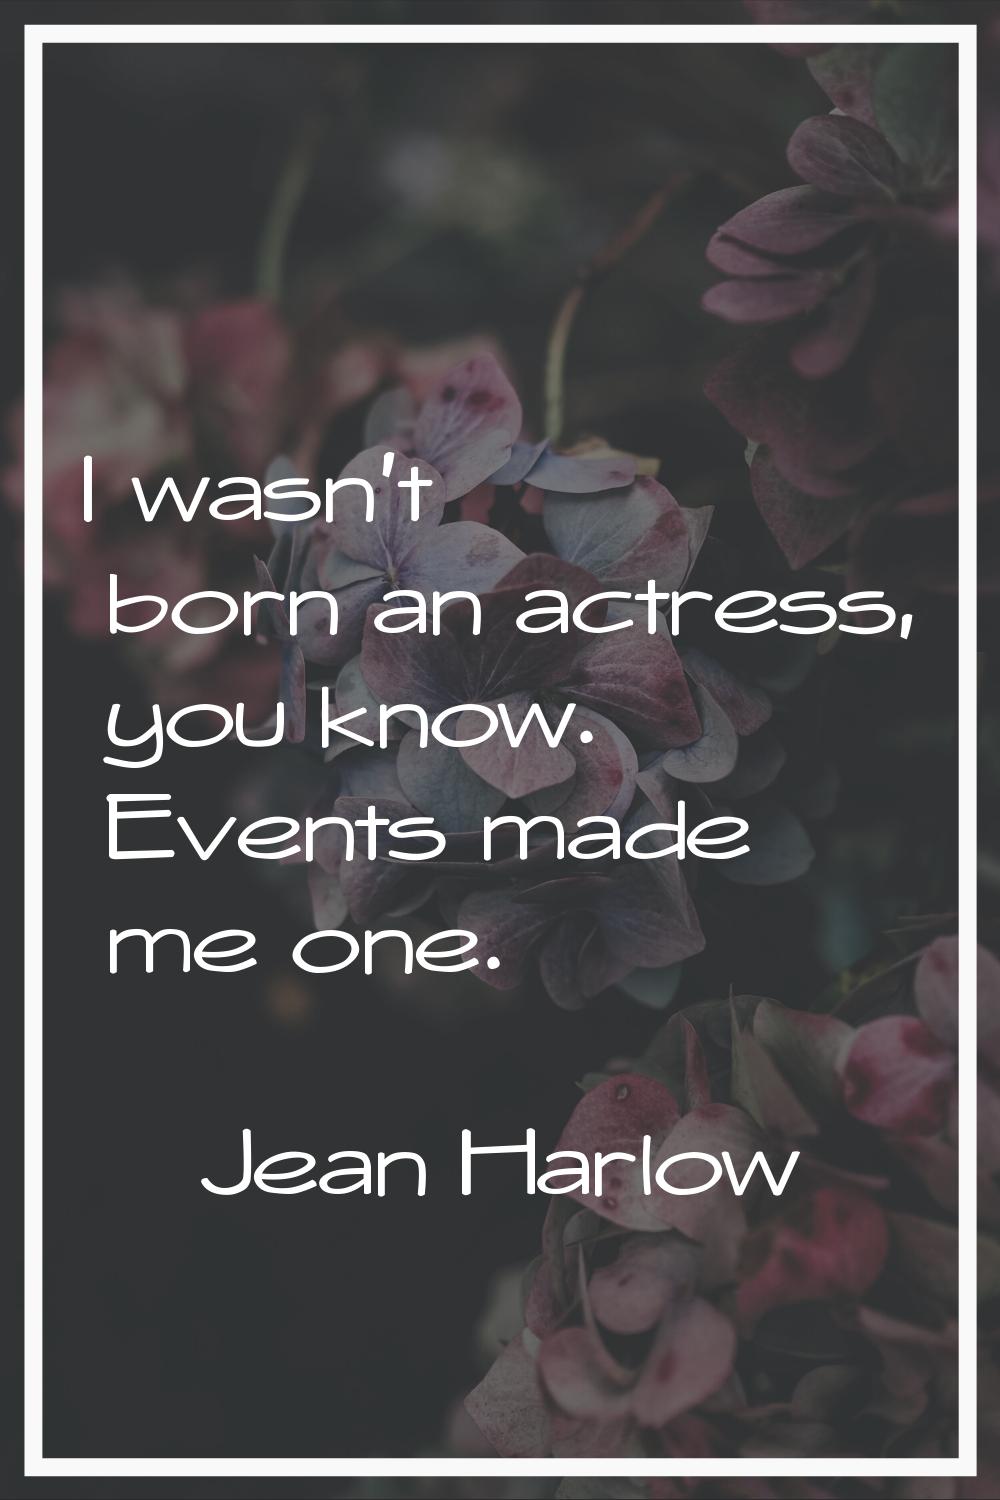 I wasn't born an actress, you know. Events made me one.